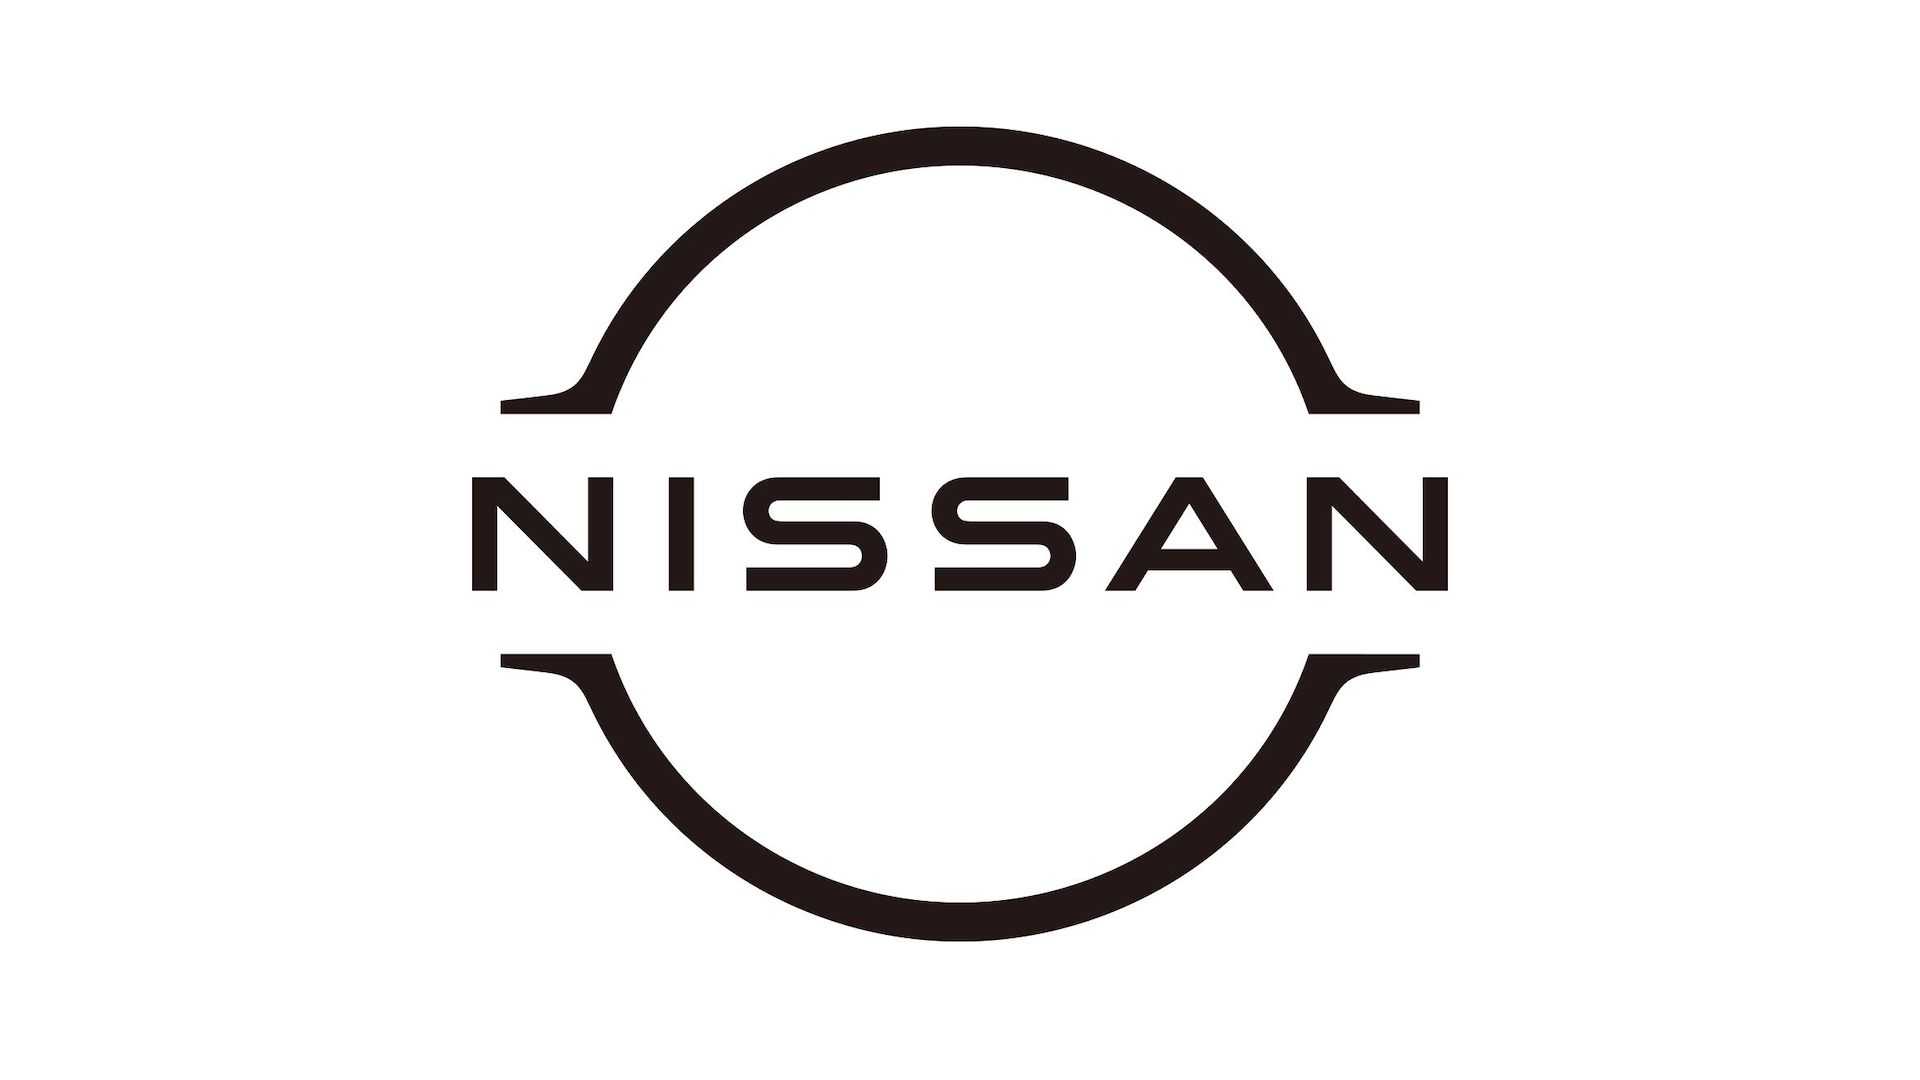 Nissan by Blibli Official Store